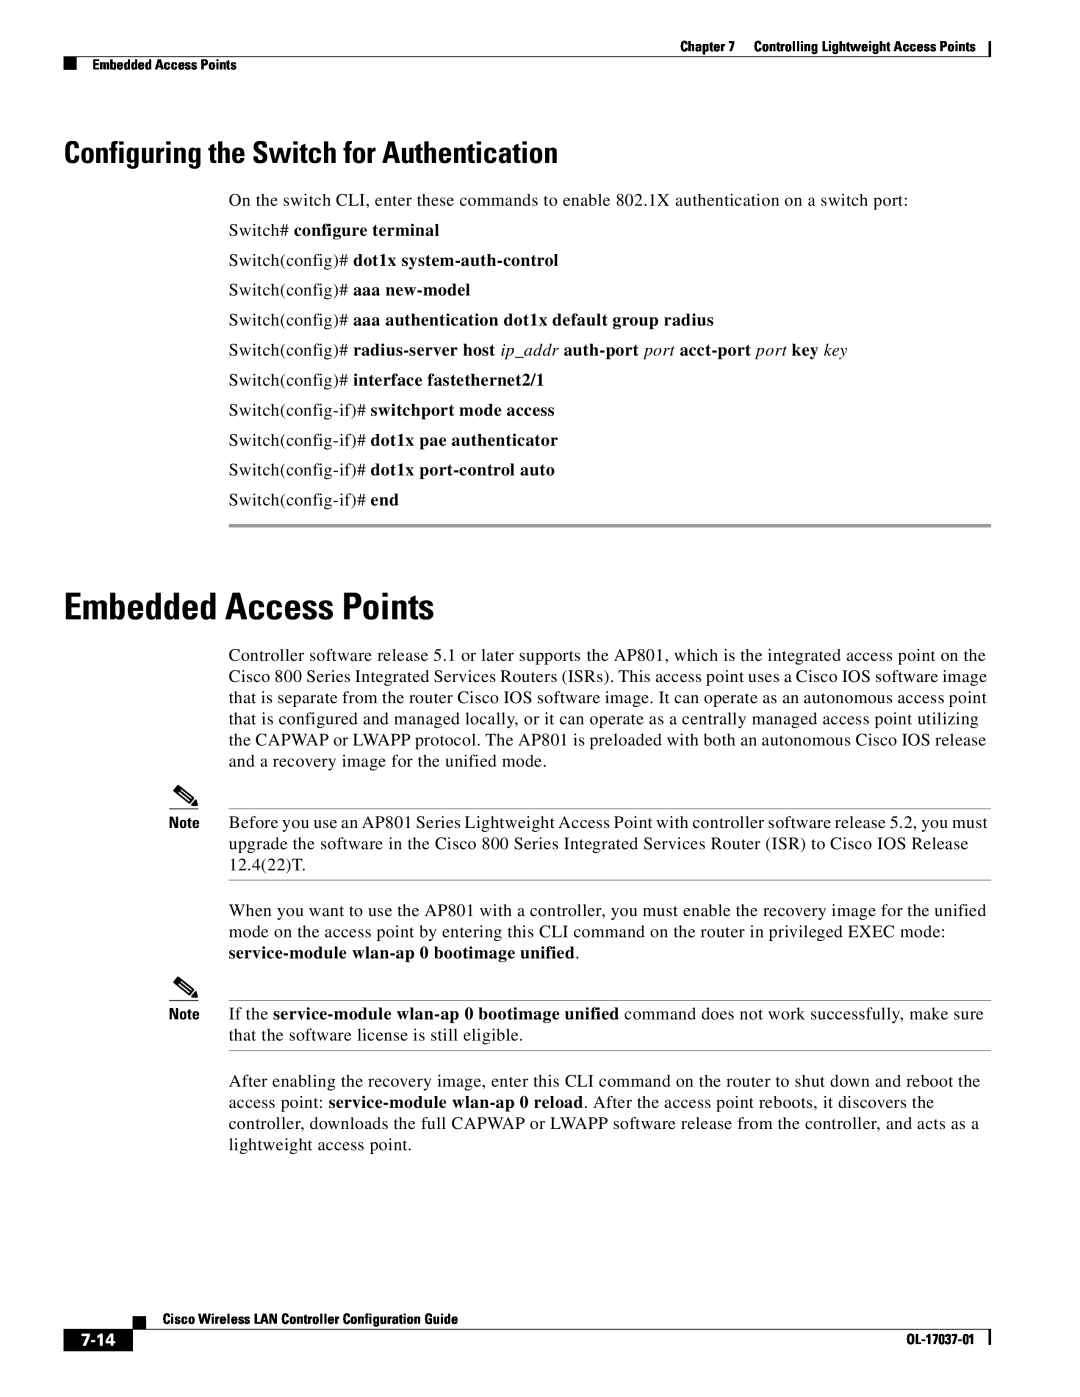 Cisco Systems OL-17037-01 manual Embedded Access Points, Configuring the Switch for Authentication, 7-14 